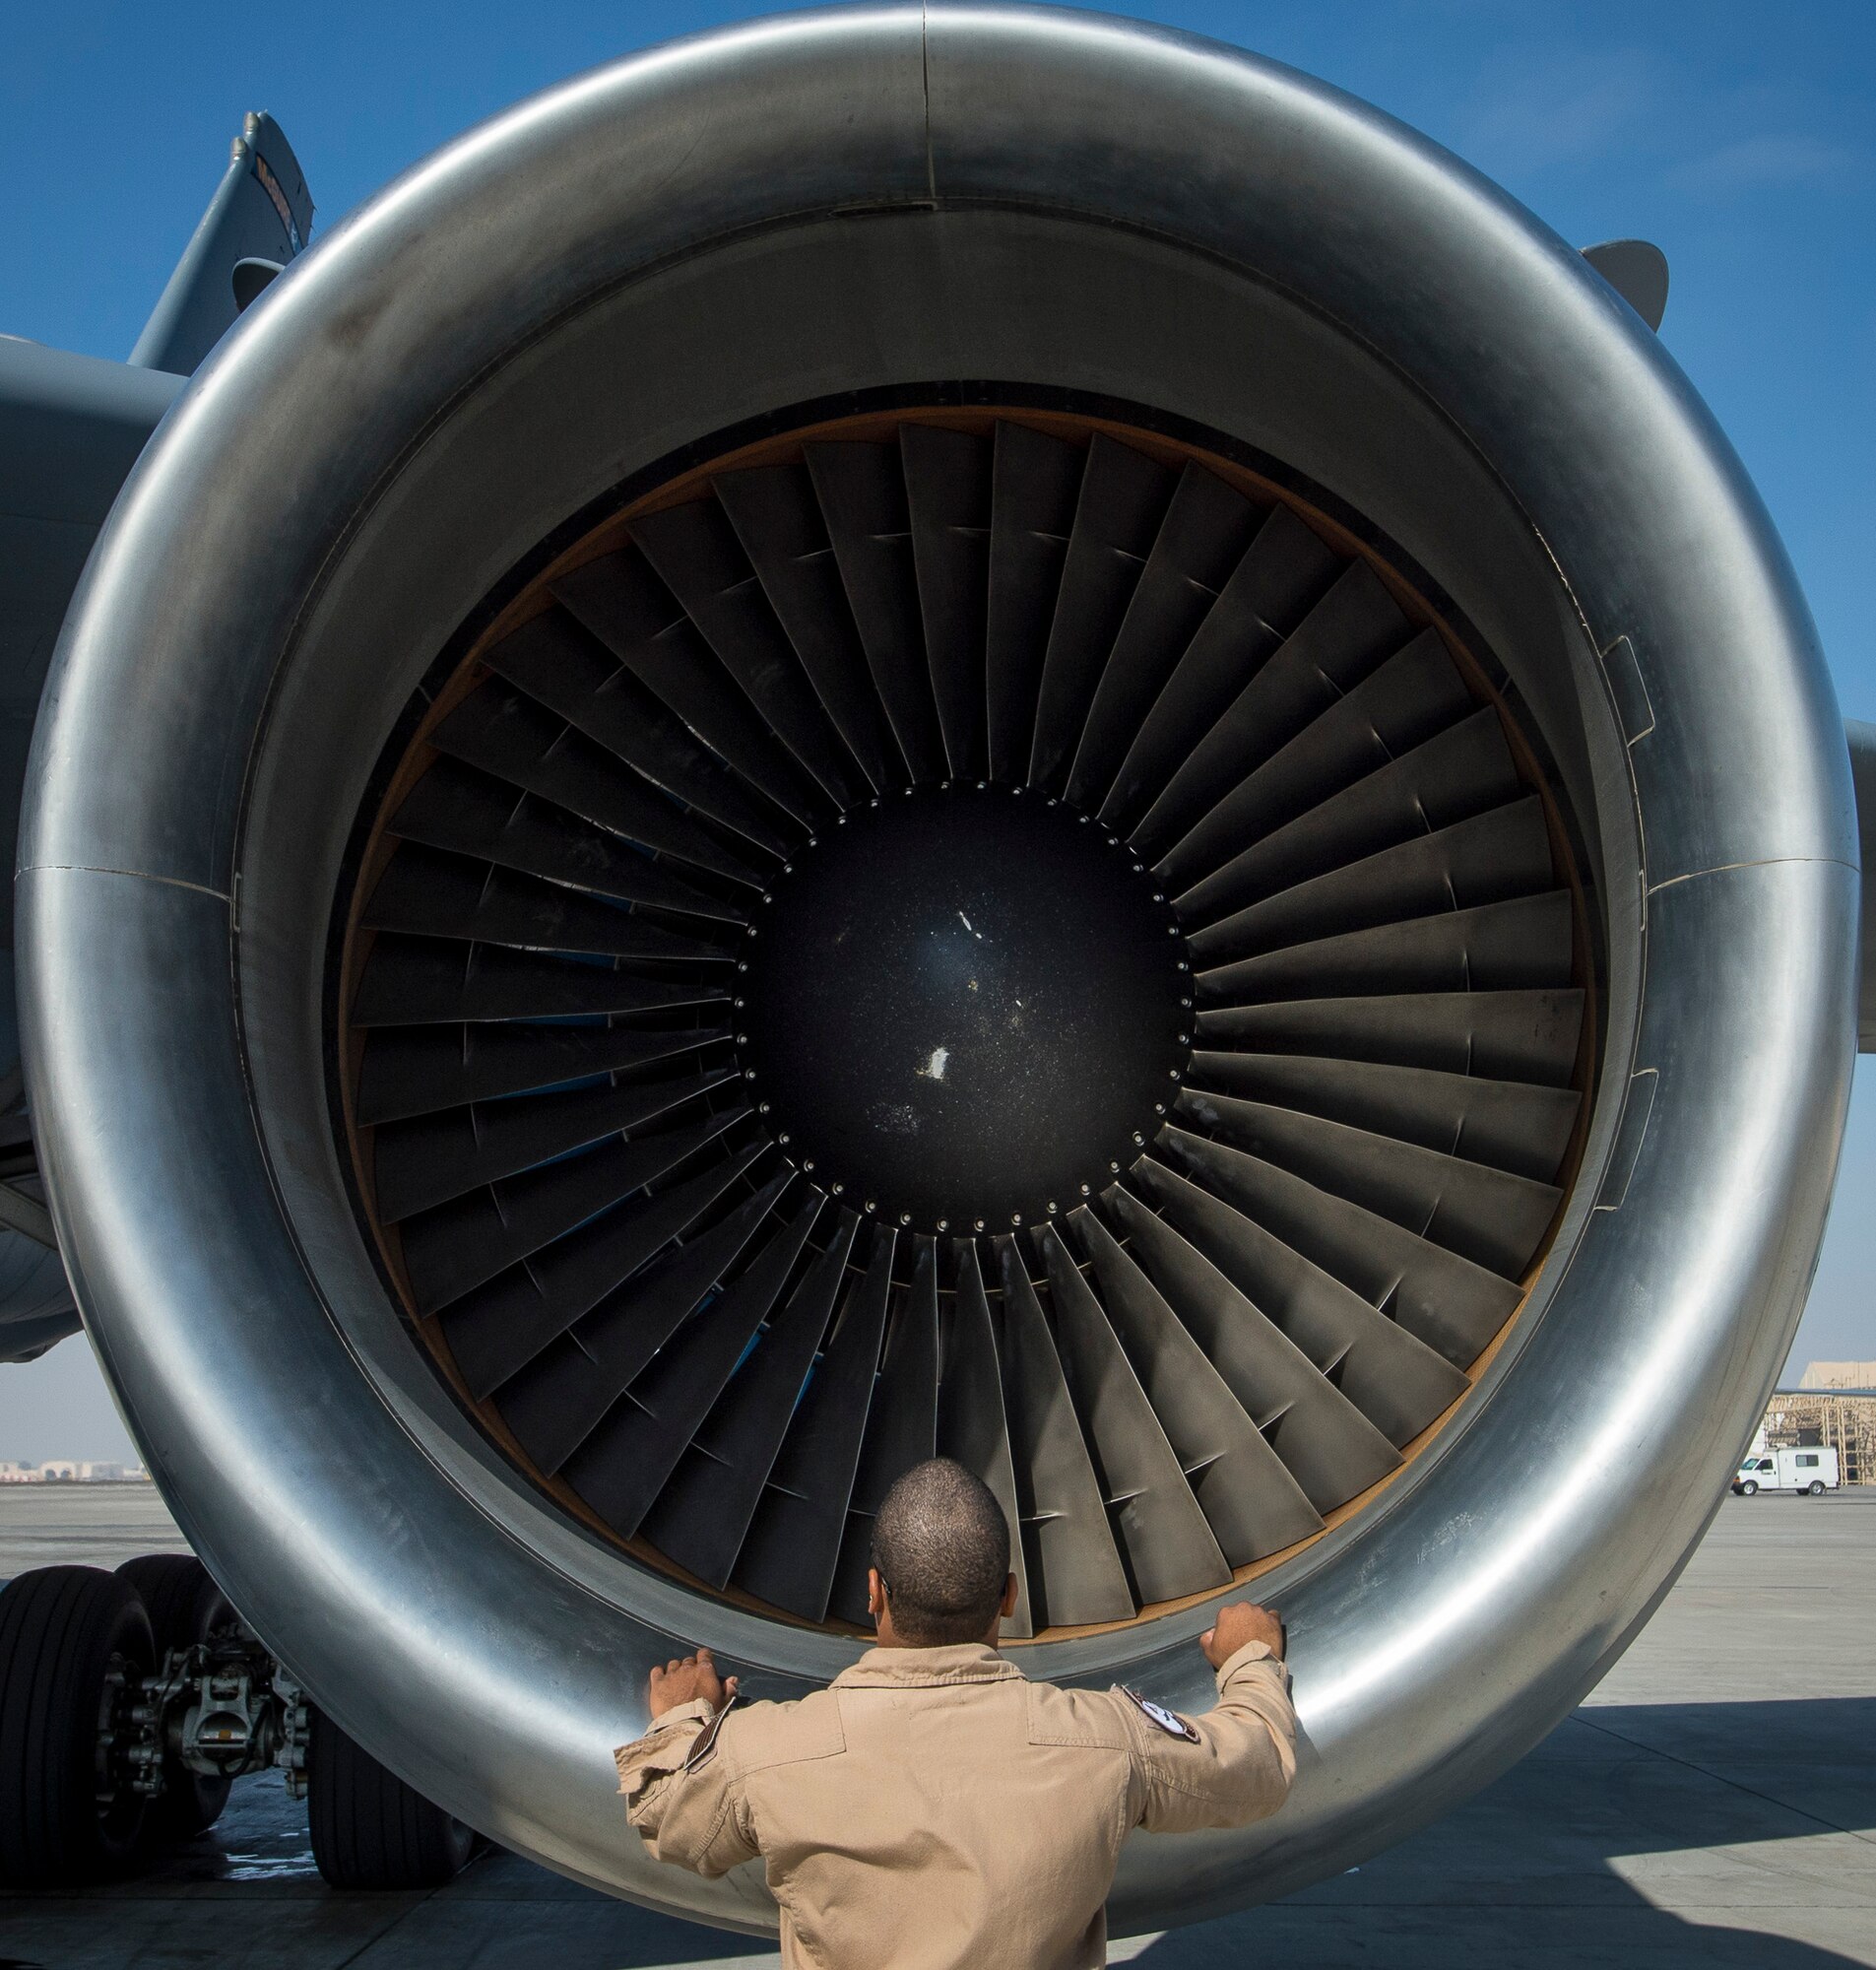 Staff Sgt. Aaron completes a KC-10 Extender preflight inspection before flying a sortie at an undisclosed location in Southwest Asia, Dec. 25, 2016. The 380th Air Expeditionary Wing has successfully offloaded more than 58 million pounds of fuel since the beginning of the liberation of Mosul, Iraq. (U.S. Air Force photo/Senior Airman Tyler Woodward)